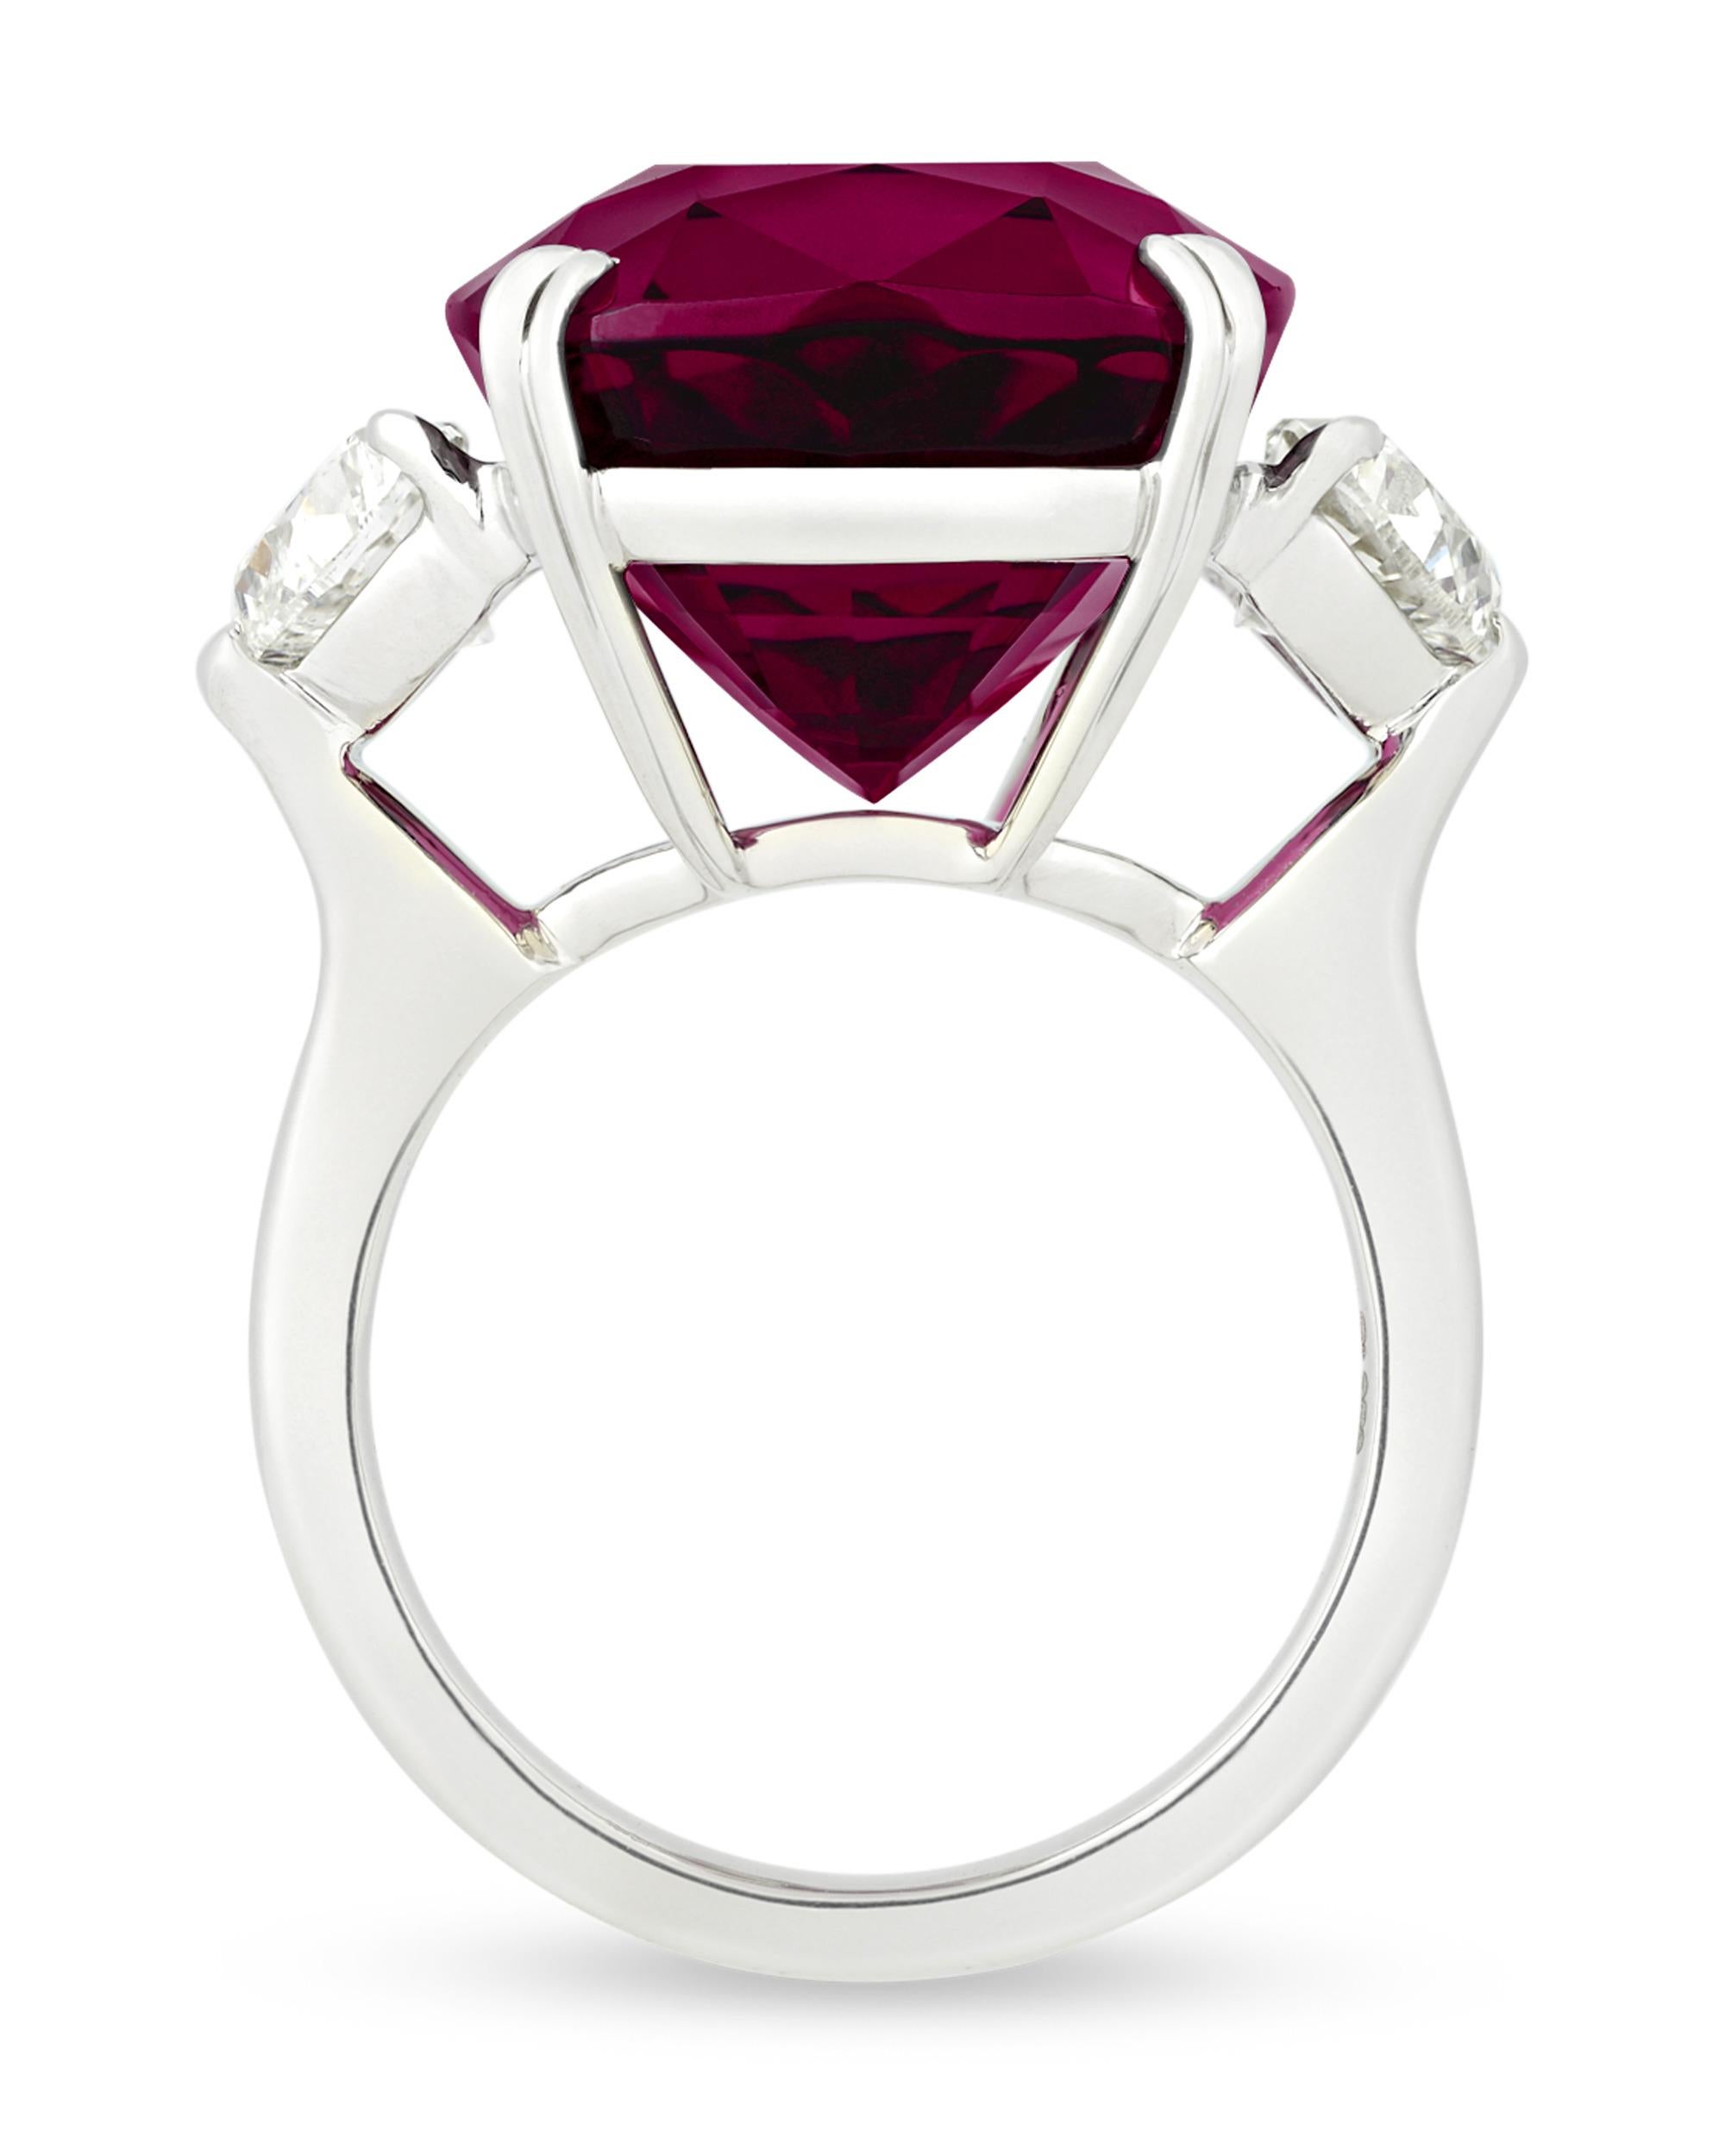 A smoldering Umbalite garnet centers this dramatic ring. Weighing an astounding 26.50 carats, the gemstone displays a radiant, deep raspberry hue that exudes a regal femininity. Classically set in platinum, the stone is complemented by two